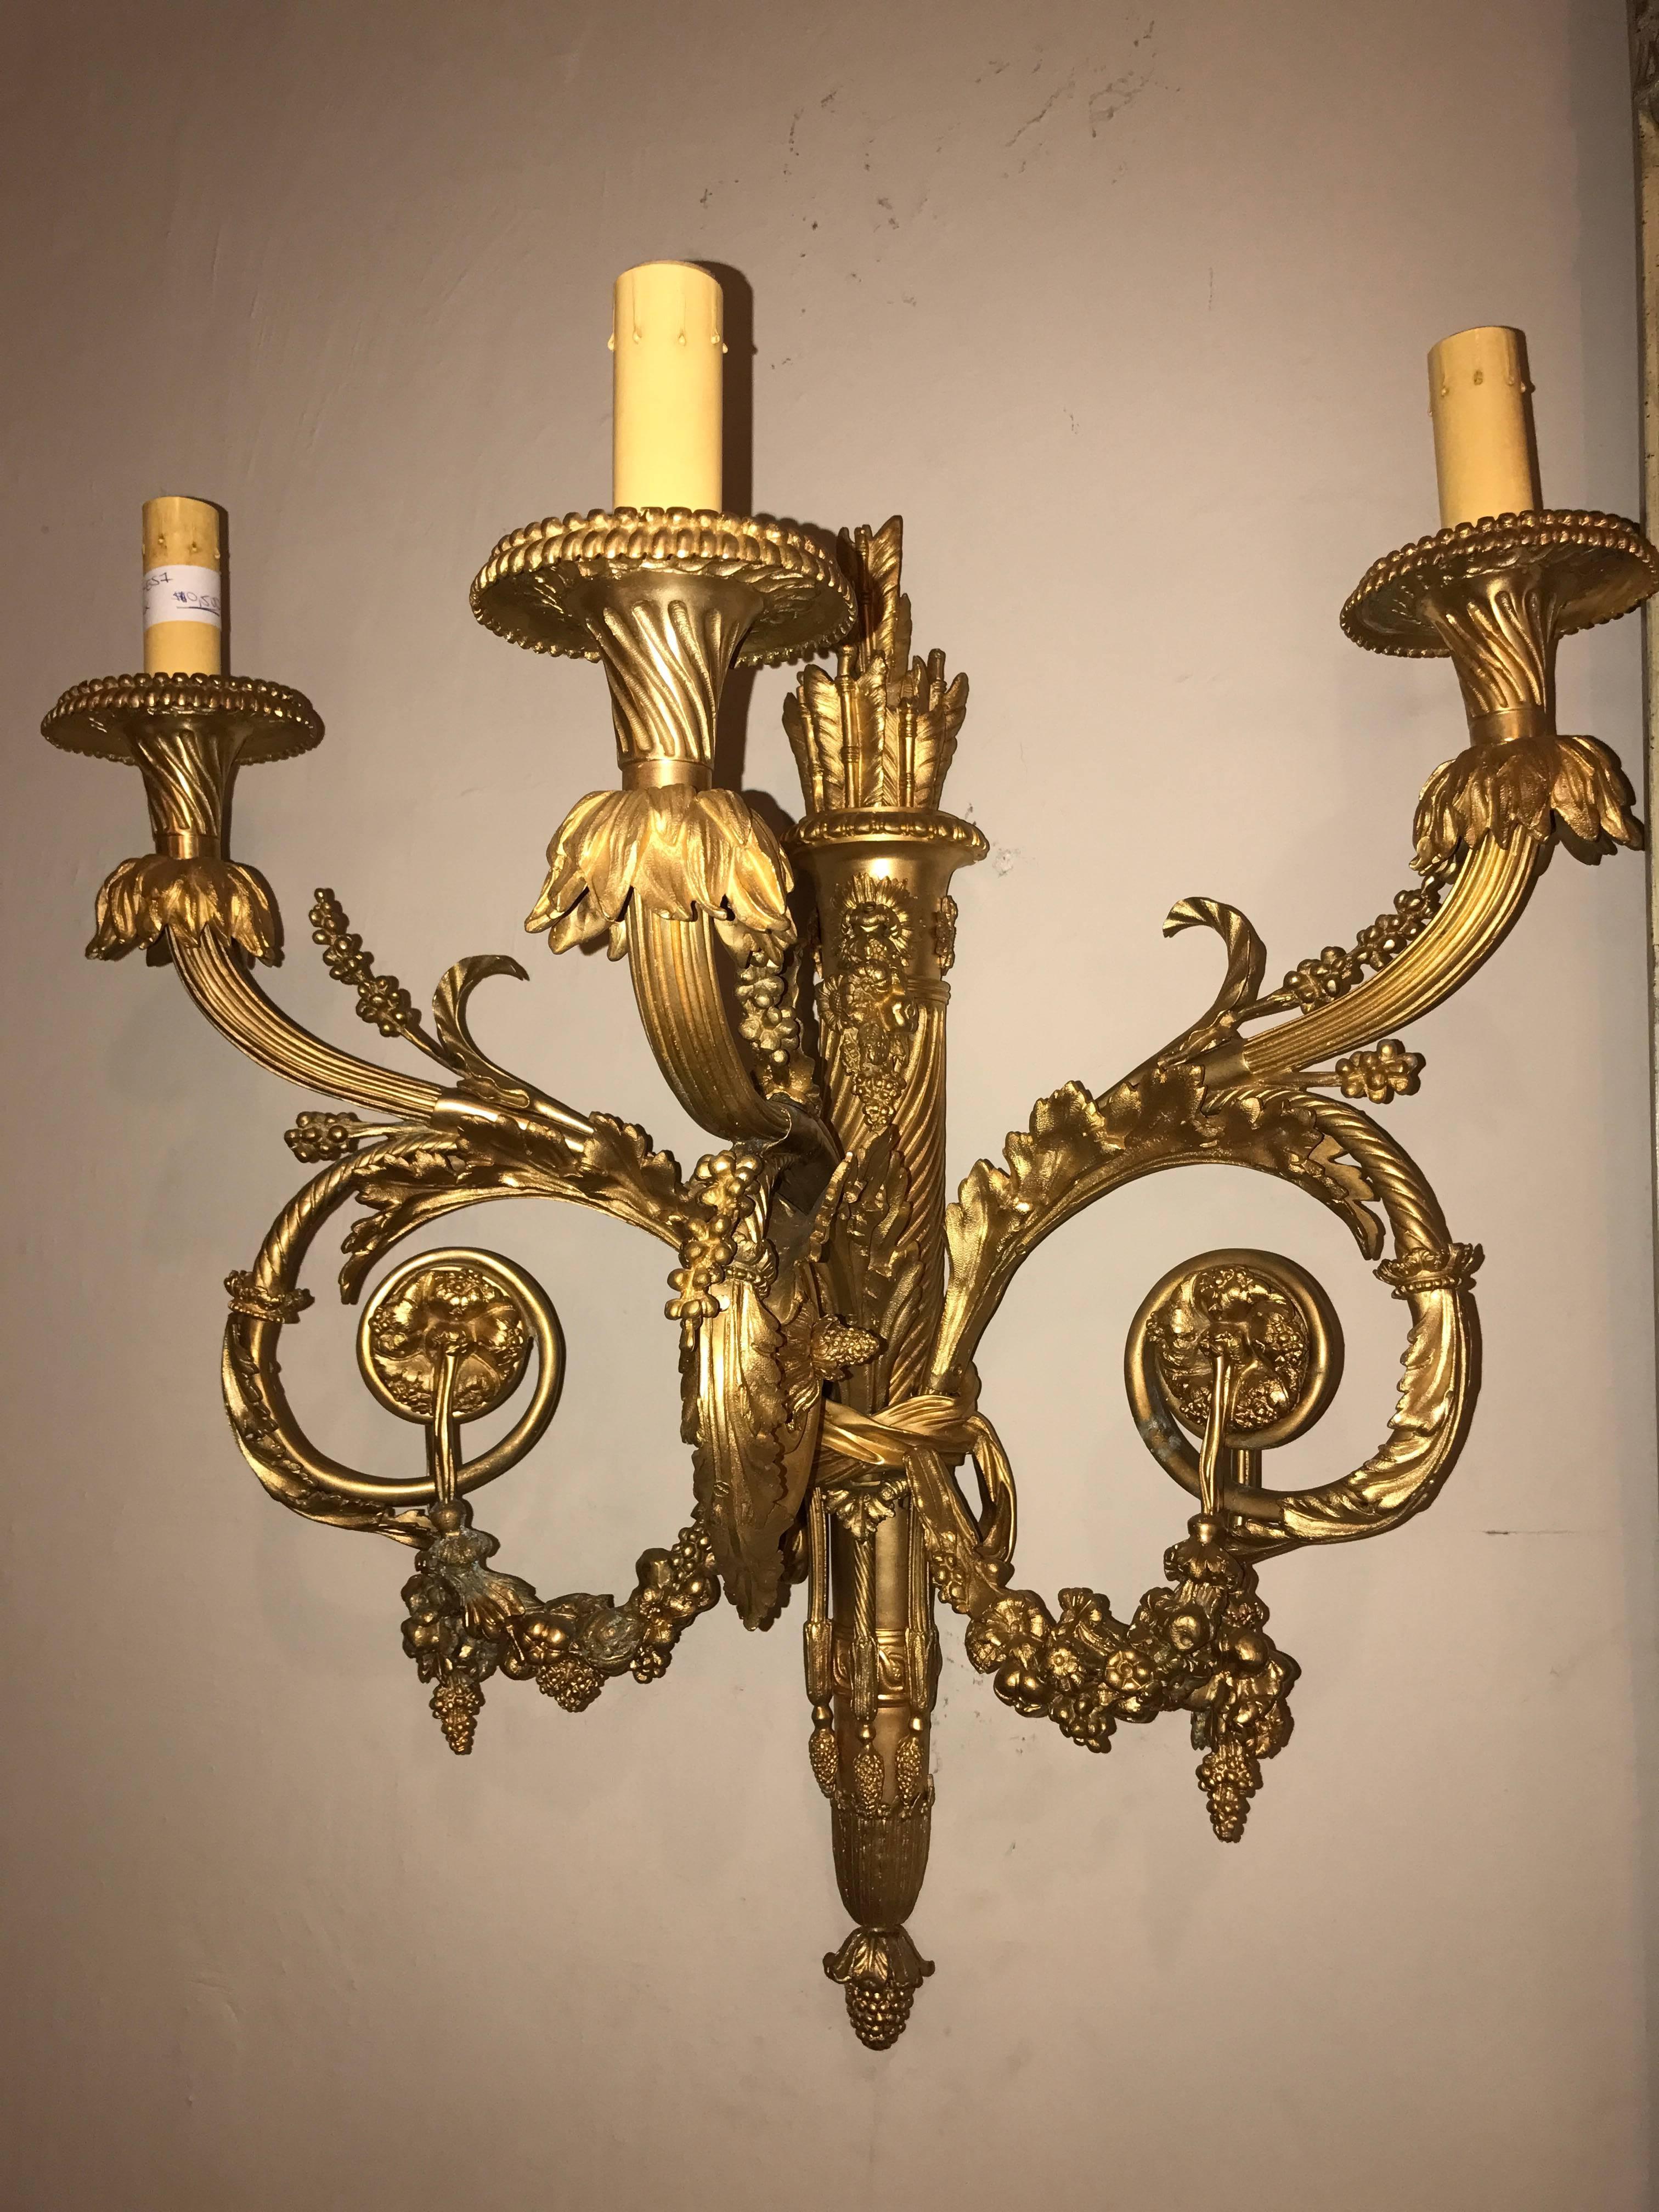 A pair of monumental three-light sconces solid bronze Louis XVI style. At the time of this listing I have three pair available. Price is for one pair only.